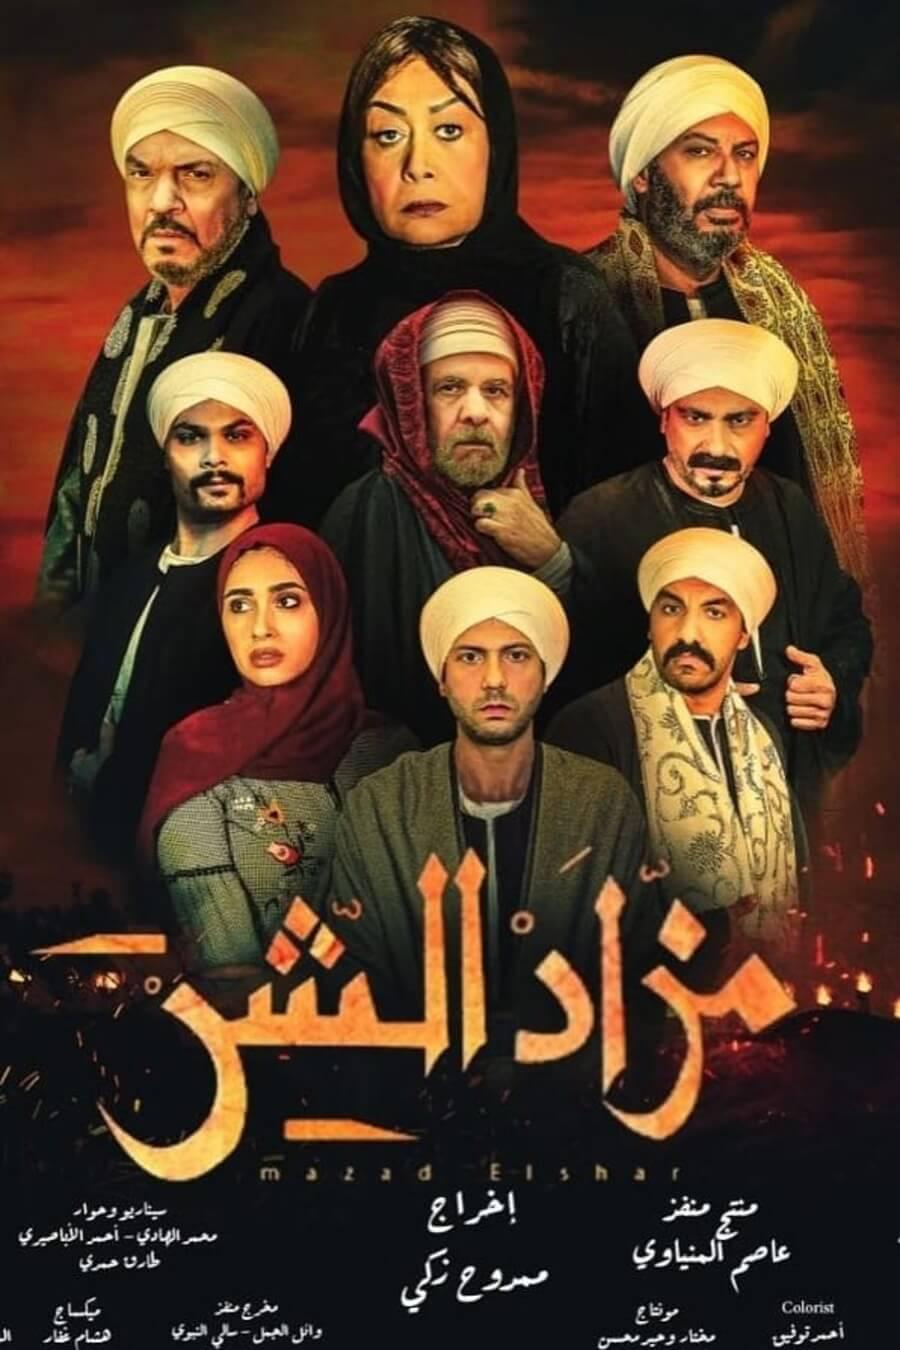 TV ratings for Mazad El Shar (مزاد الشر) in Sweden. TOD TV series